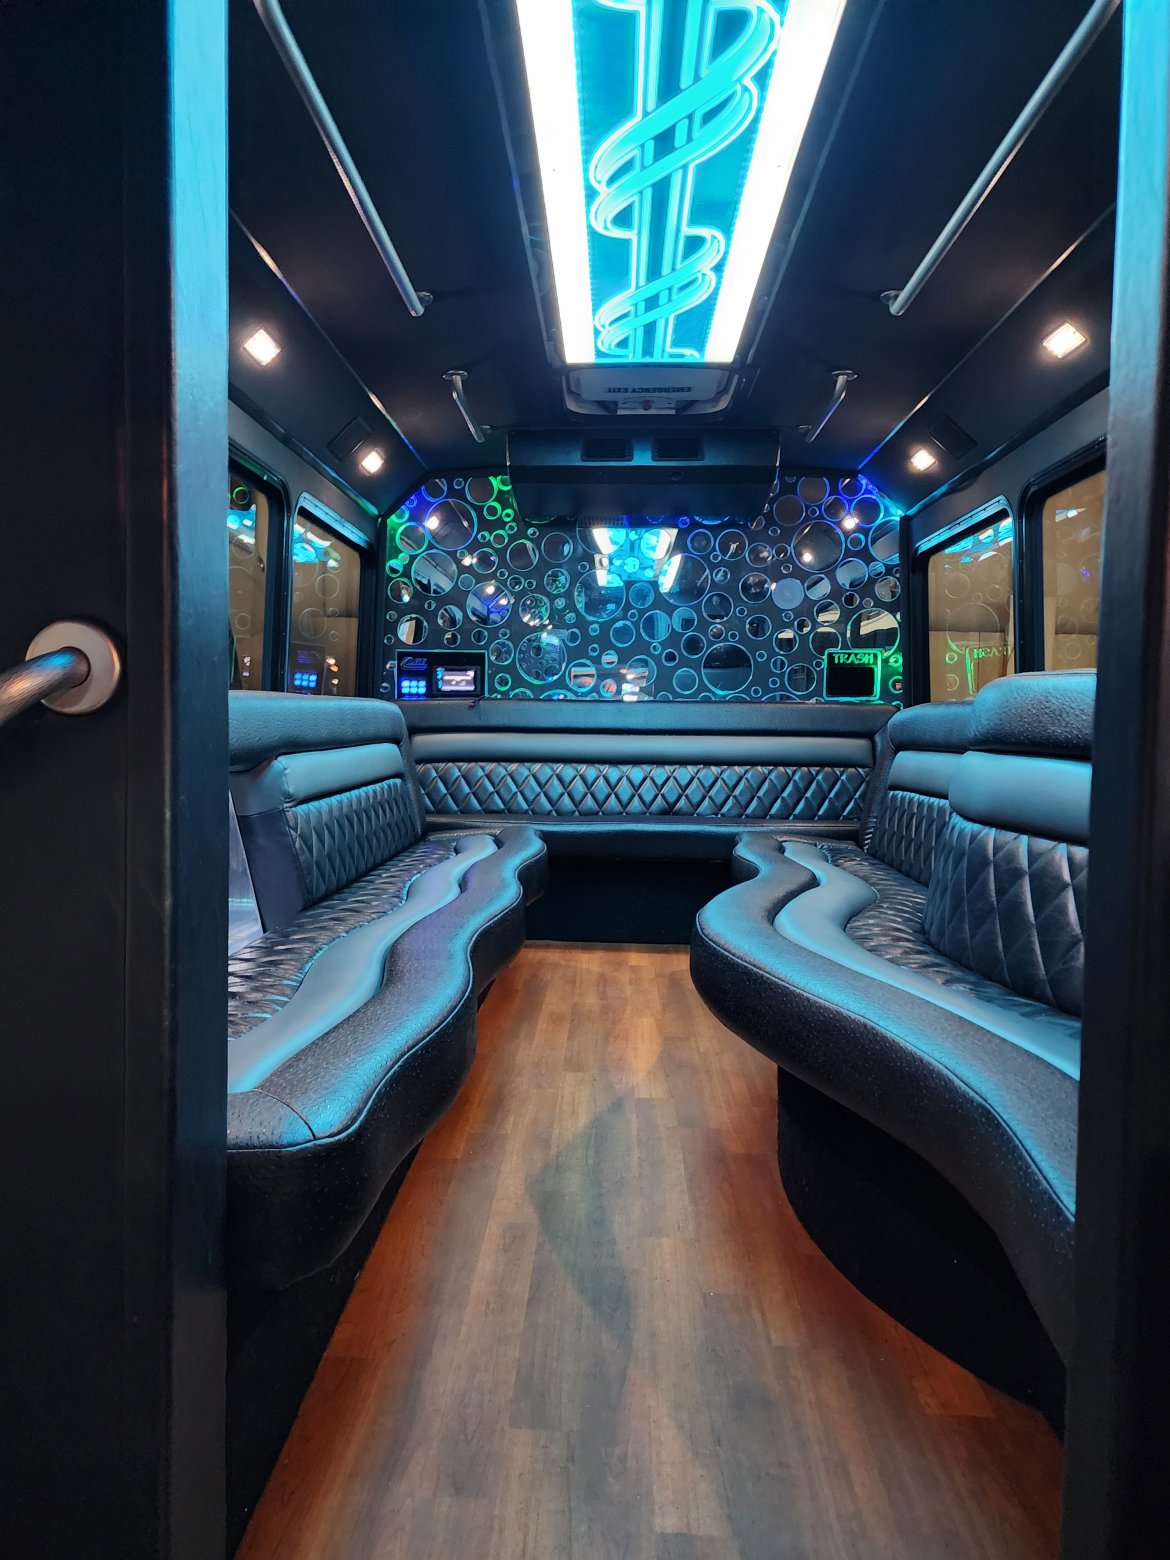 Limo Bus for sale: 2013 Ford E450 by LGE